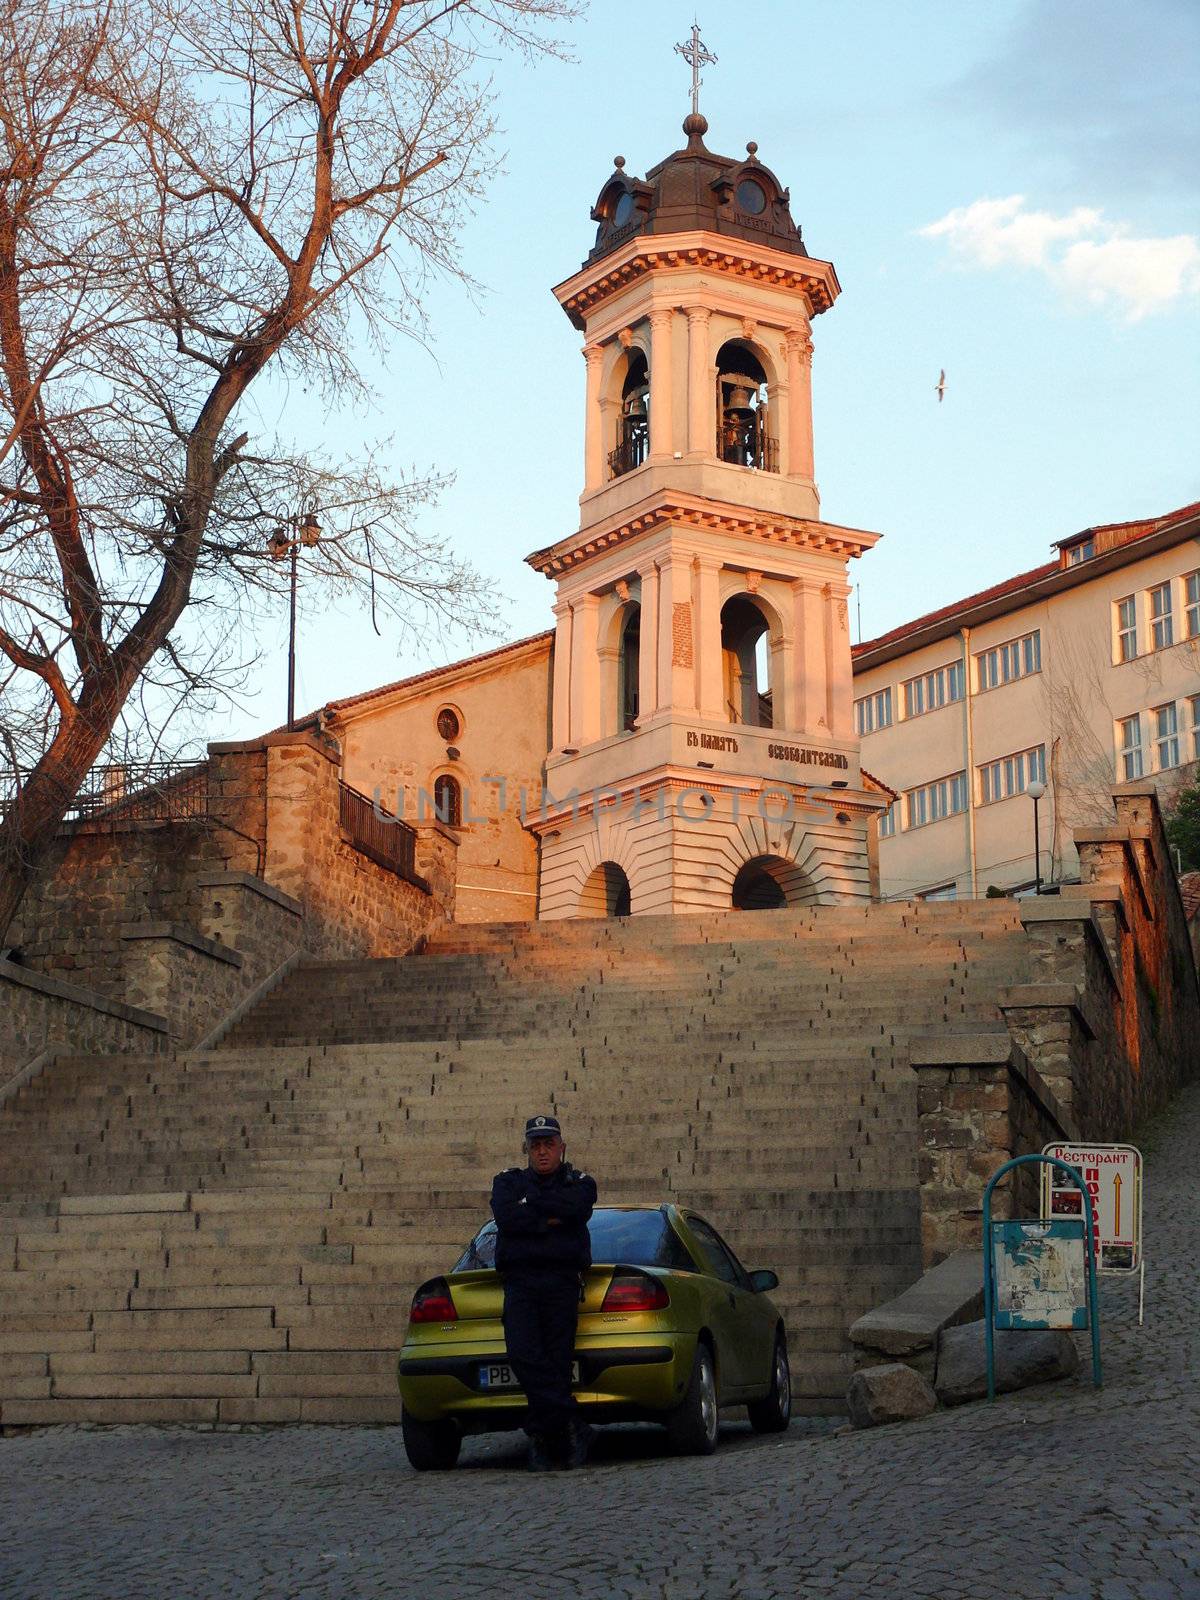 Plovdiv, Bulgaria - April 03, 2010: Policeman staying near the car in front of Saint Godmother Church. Plovdiv, Bulgaria